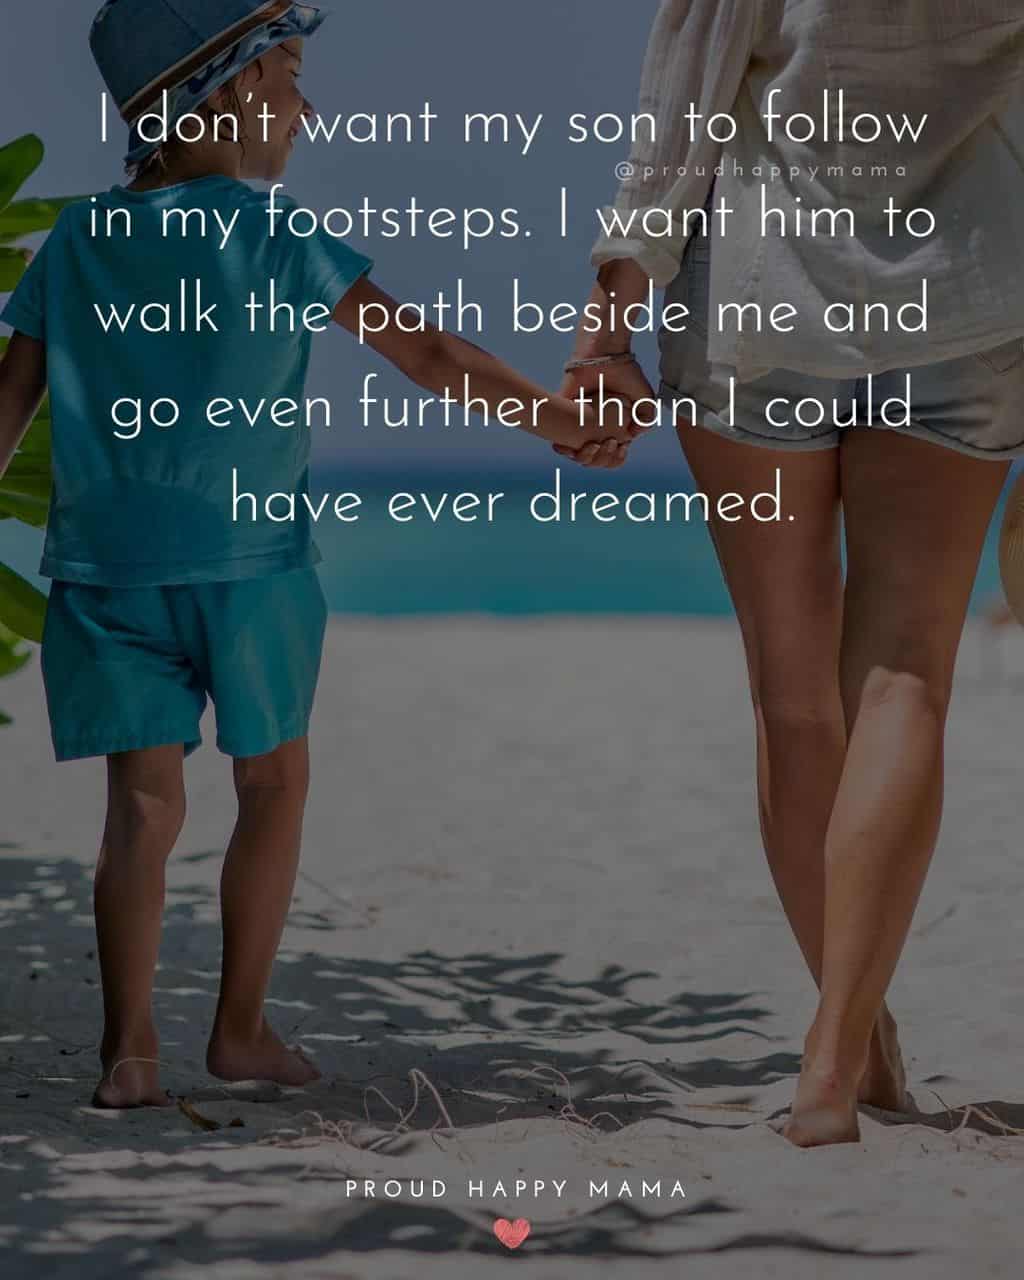 Son Quotes - I don’t want my son to follow in my footsteps. I want him to walk the path beside me and go even further than I